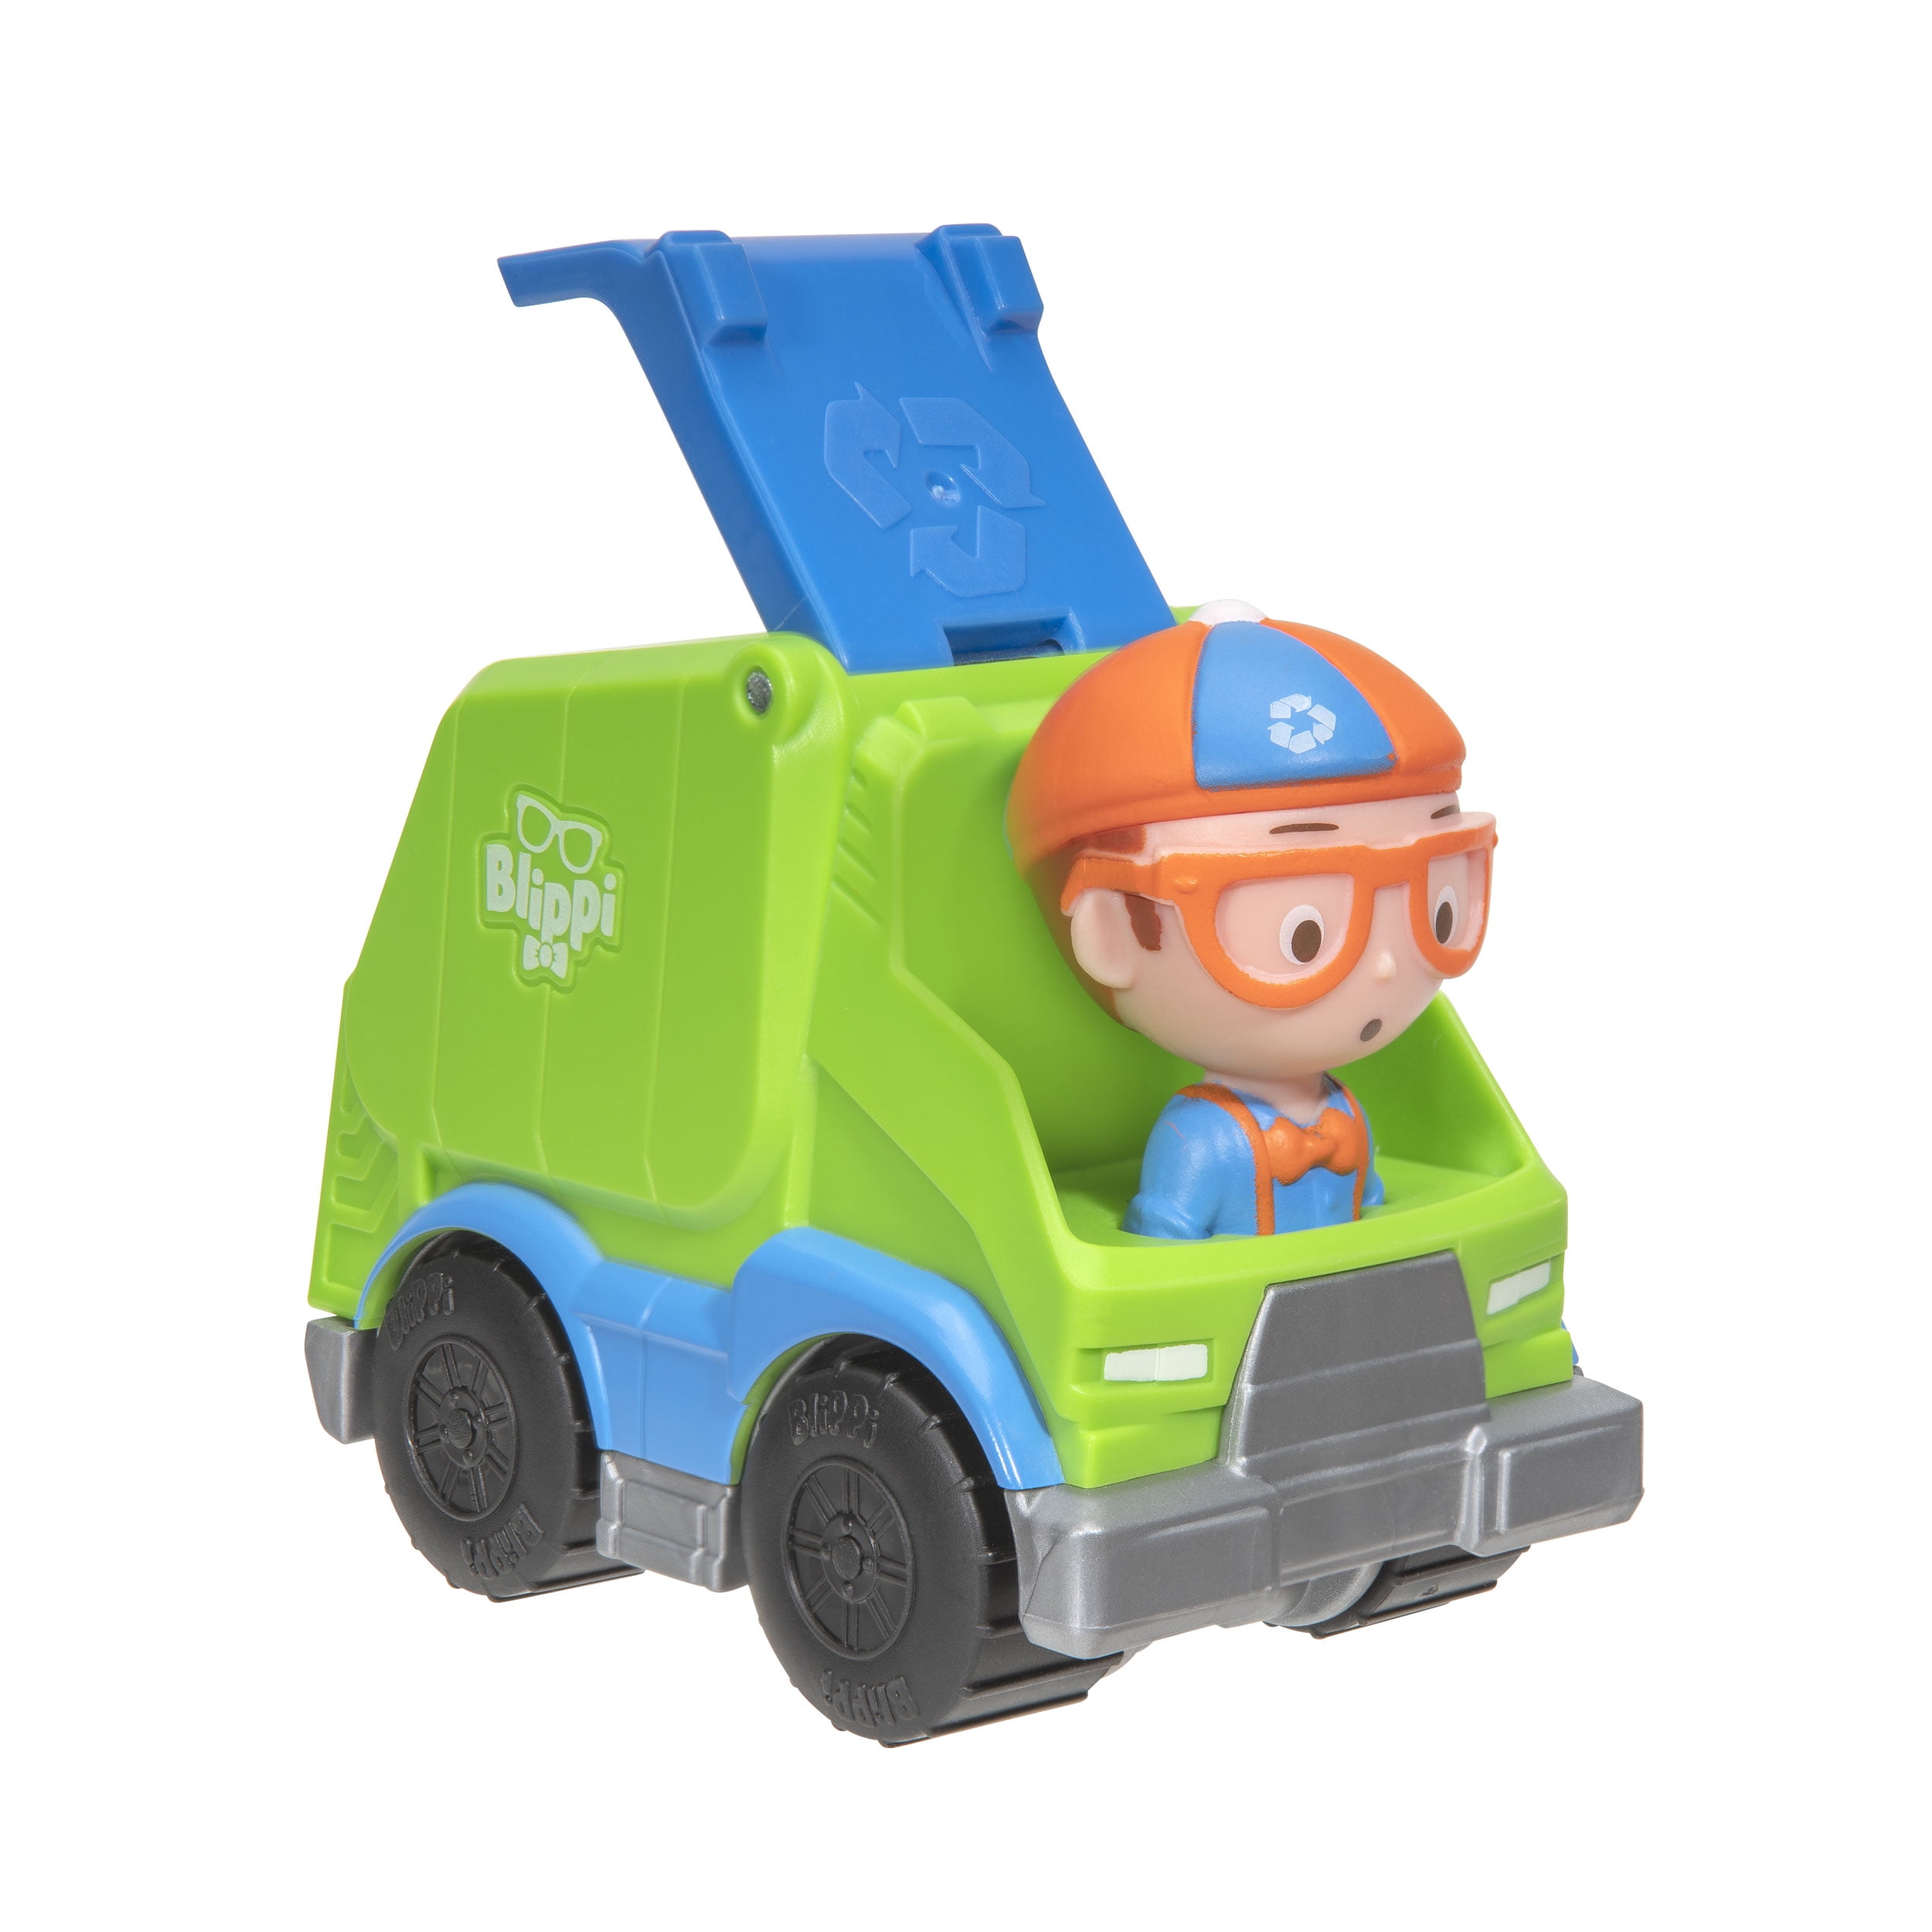 Mini Vehicles Mobile Garbage Truck With Character Toy Figure for Children Blippi for sale online 